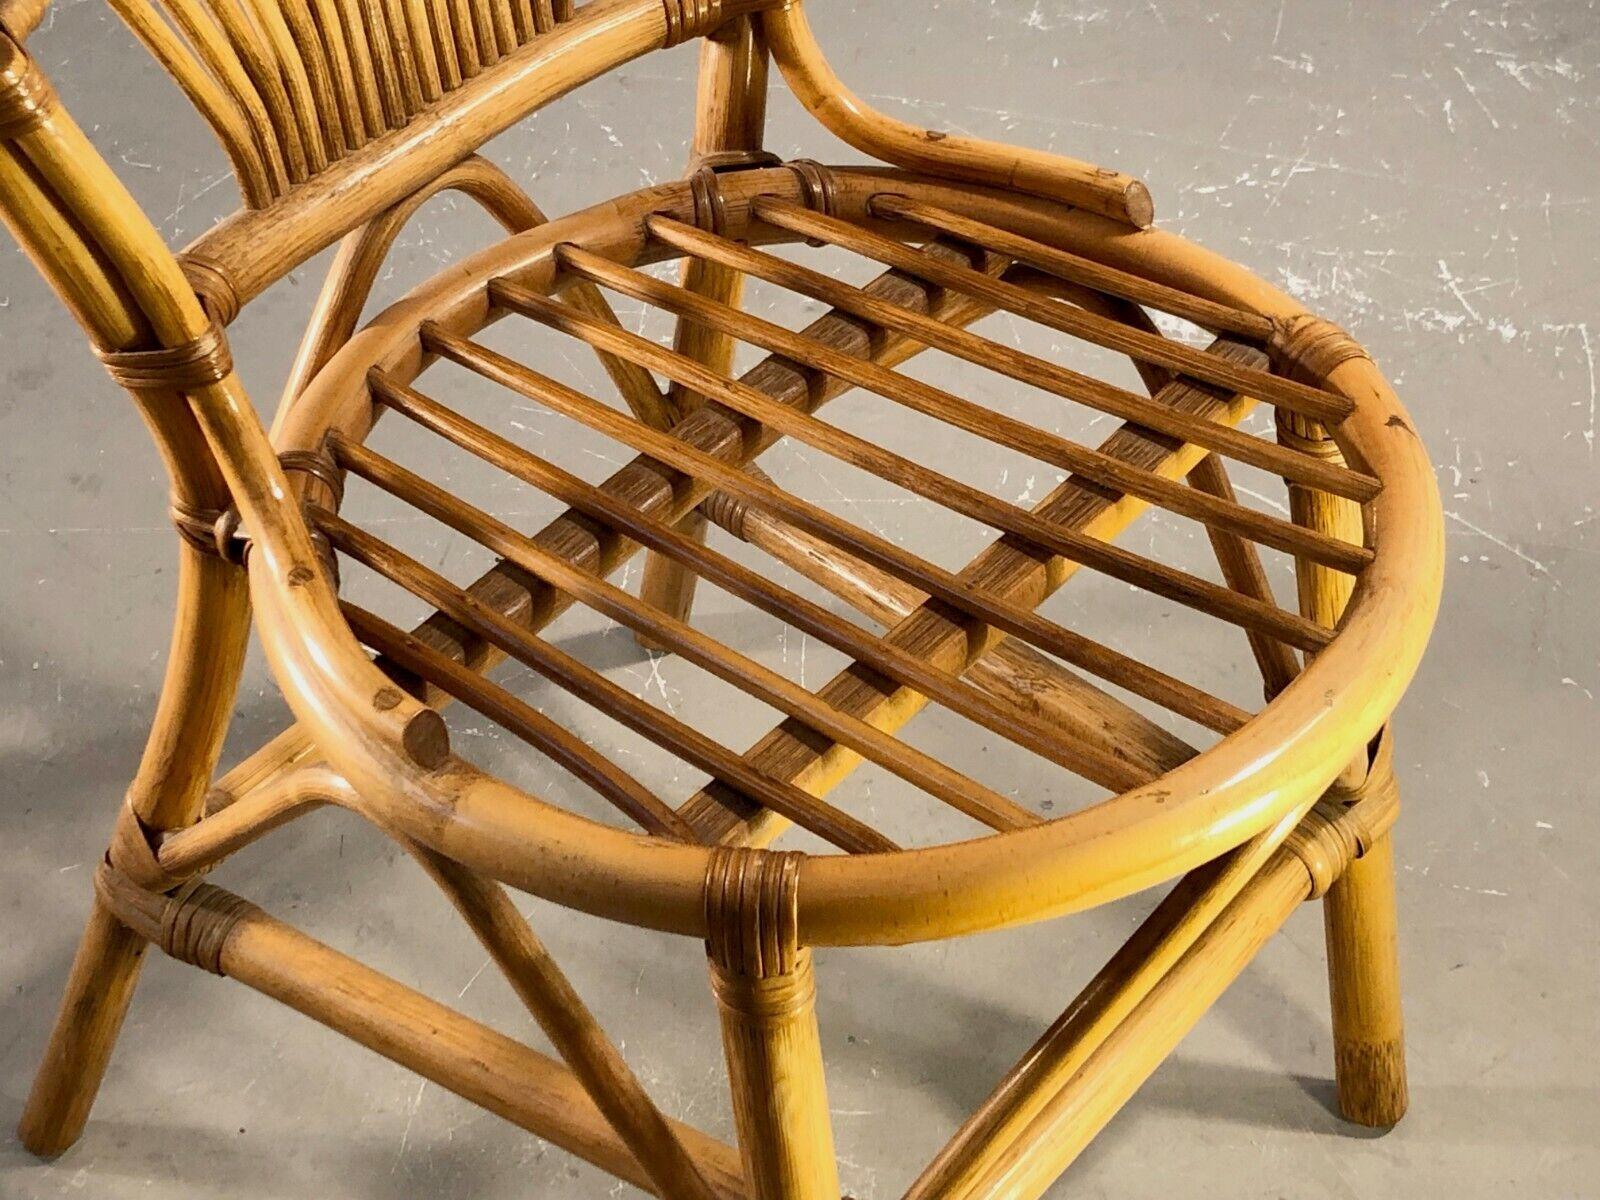 Hand-Woven A Set of 4 SHABBY-CHIC BAMBOO Chairs in AUDOUX-MINNET Style, France 1970 For Sale